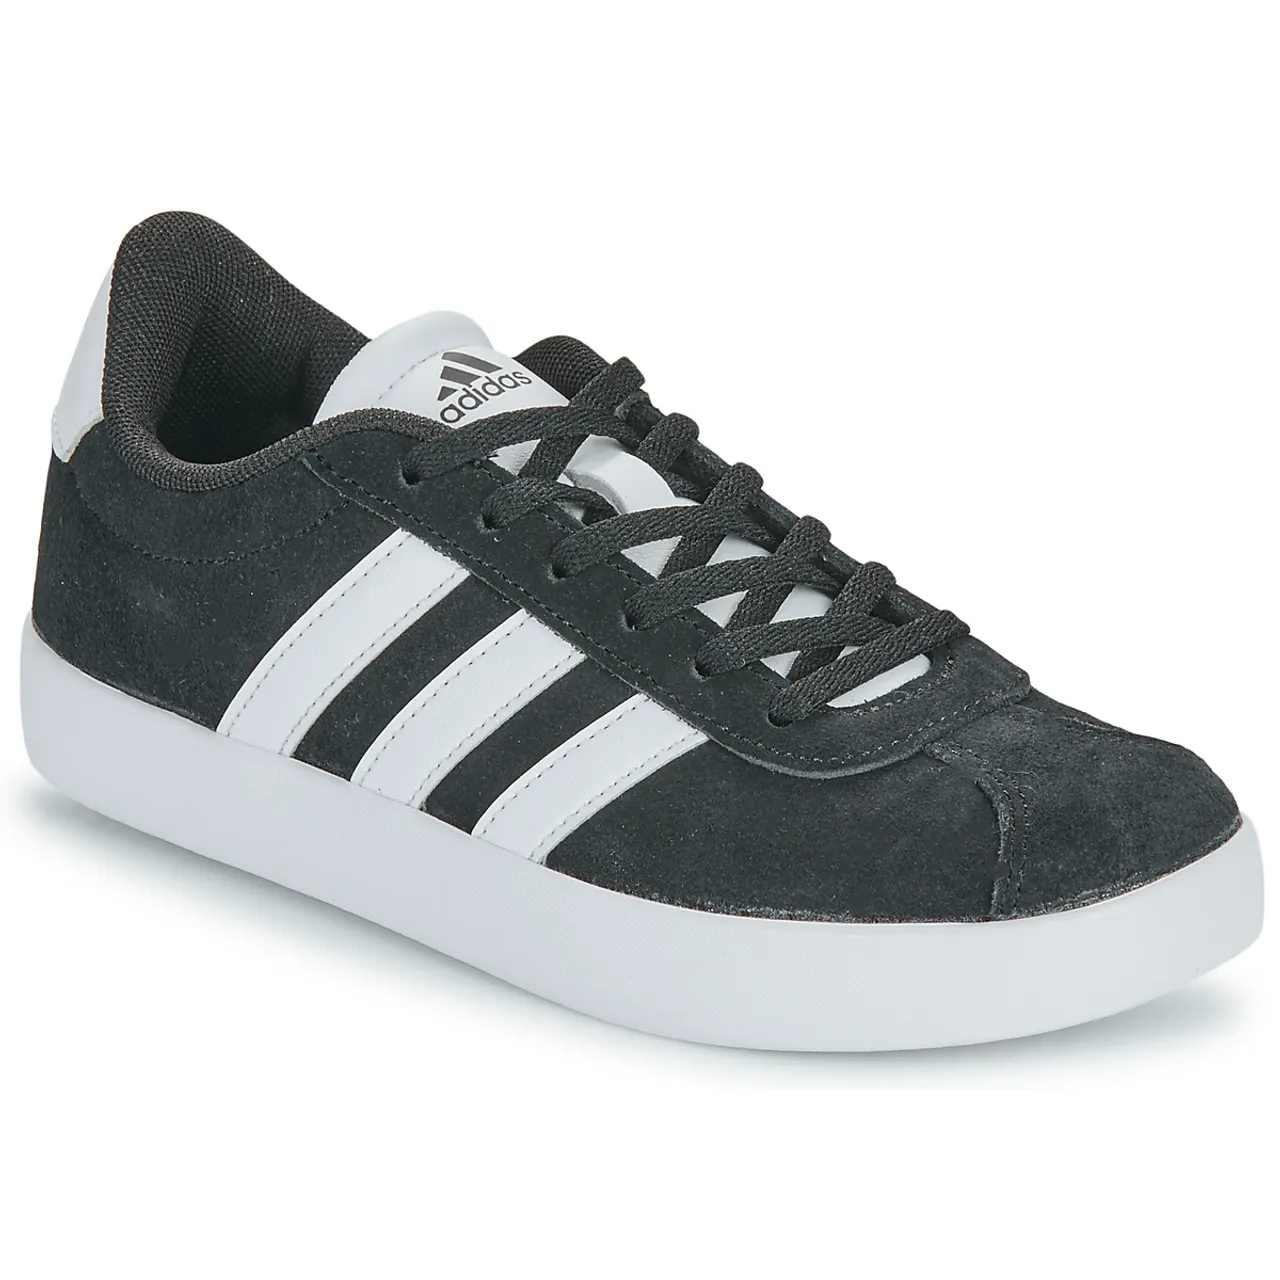 adidas  VL COURT 3.0 K  boys's Children's Shoes (Trainers) in Black